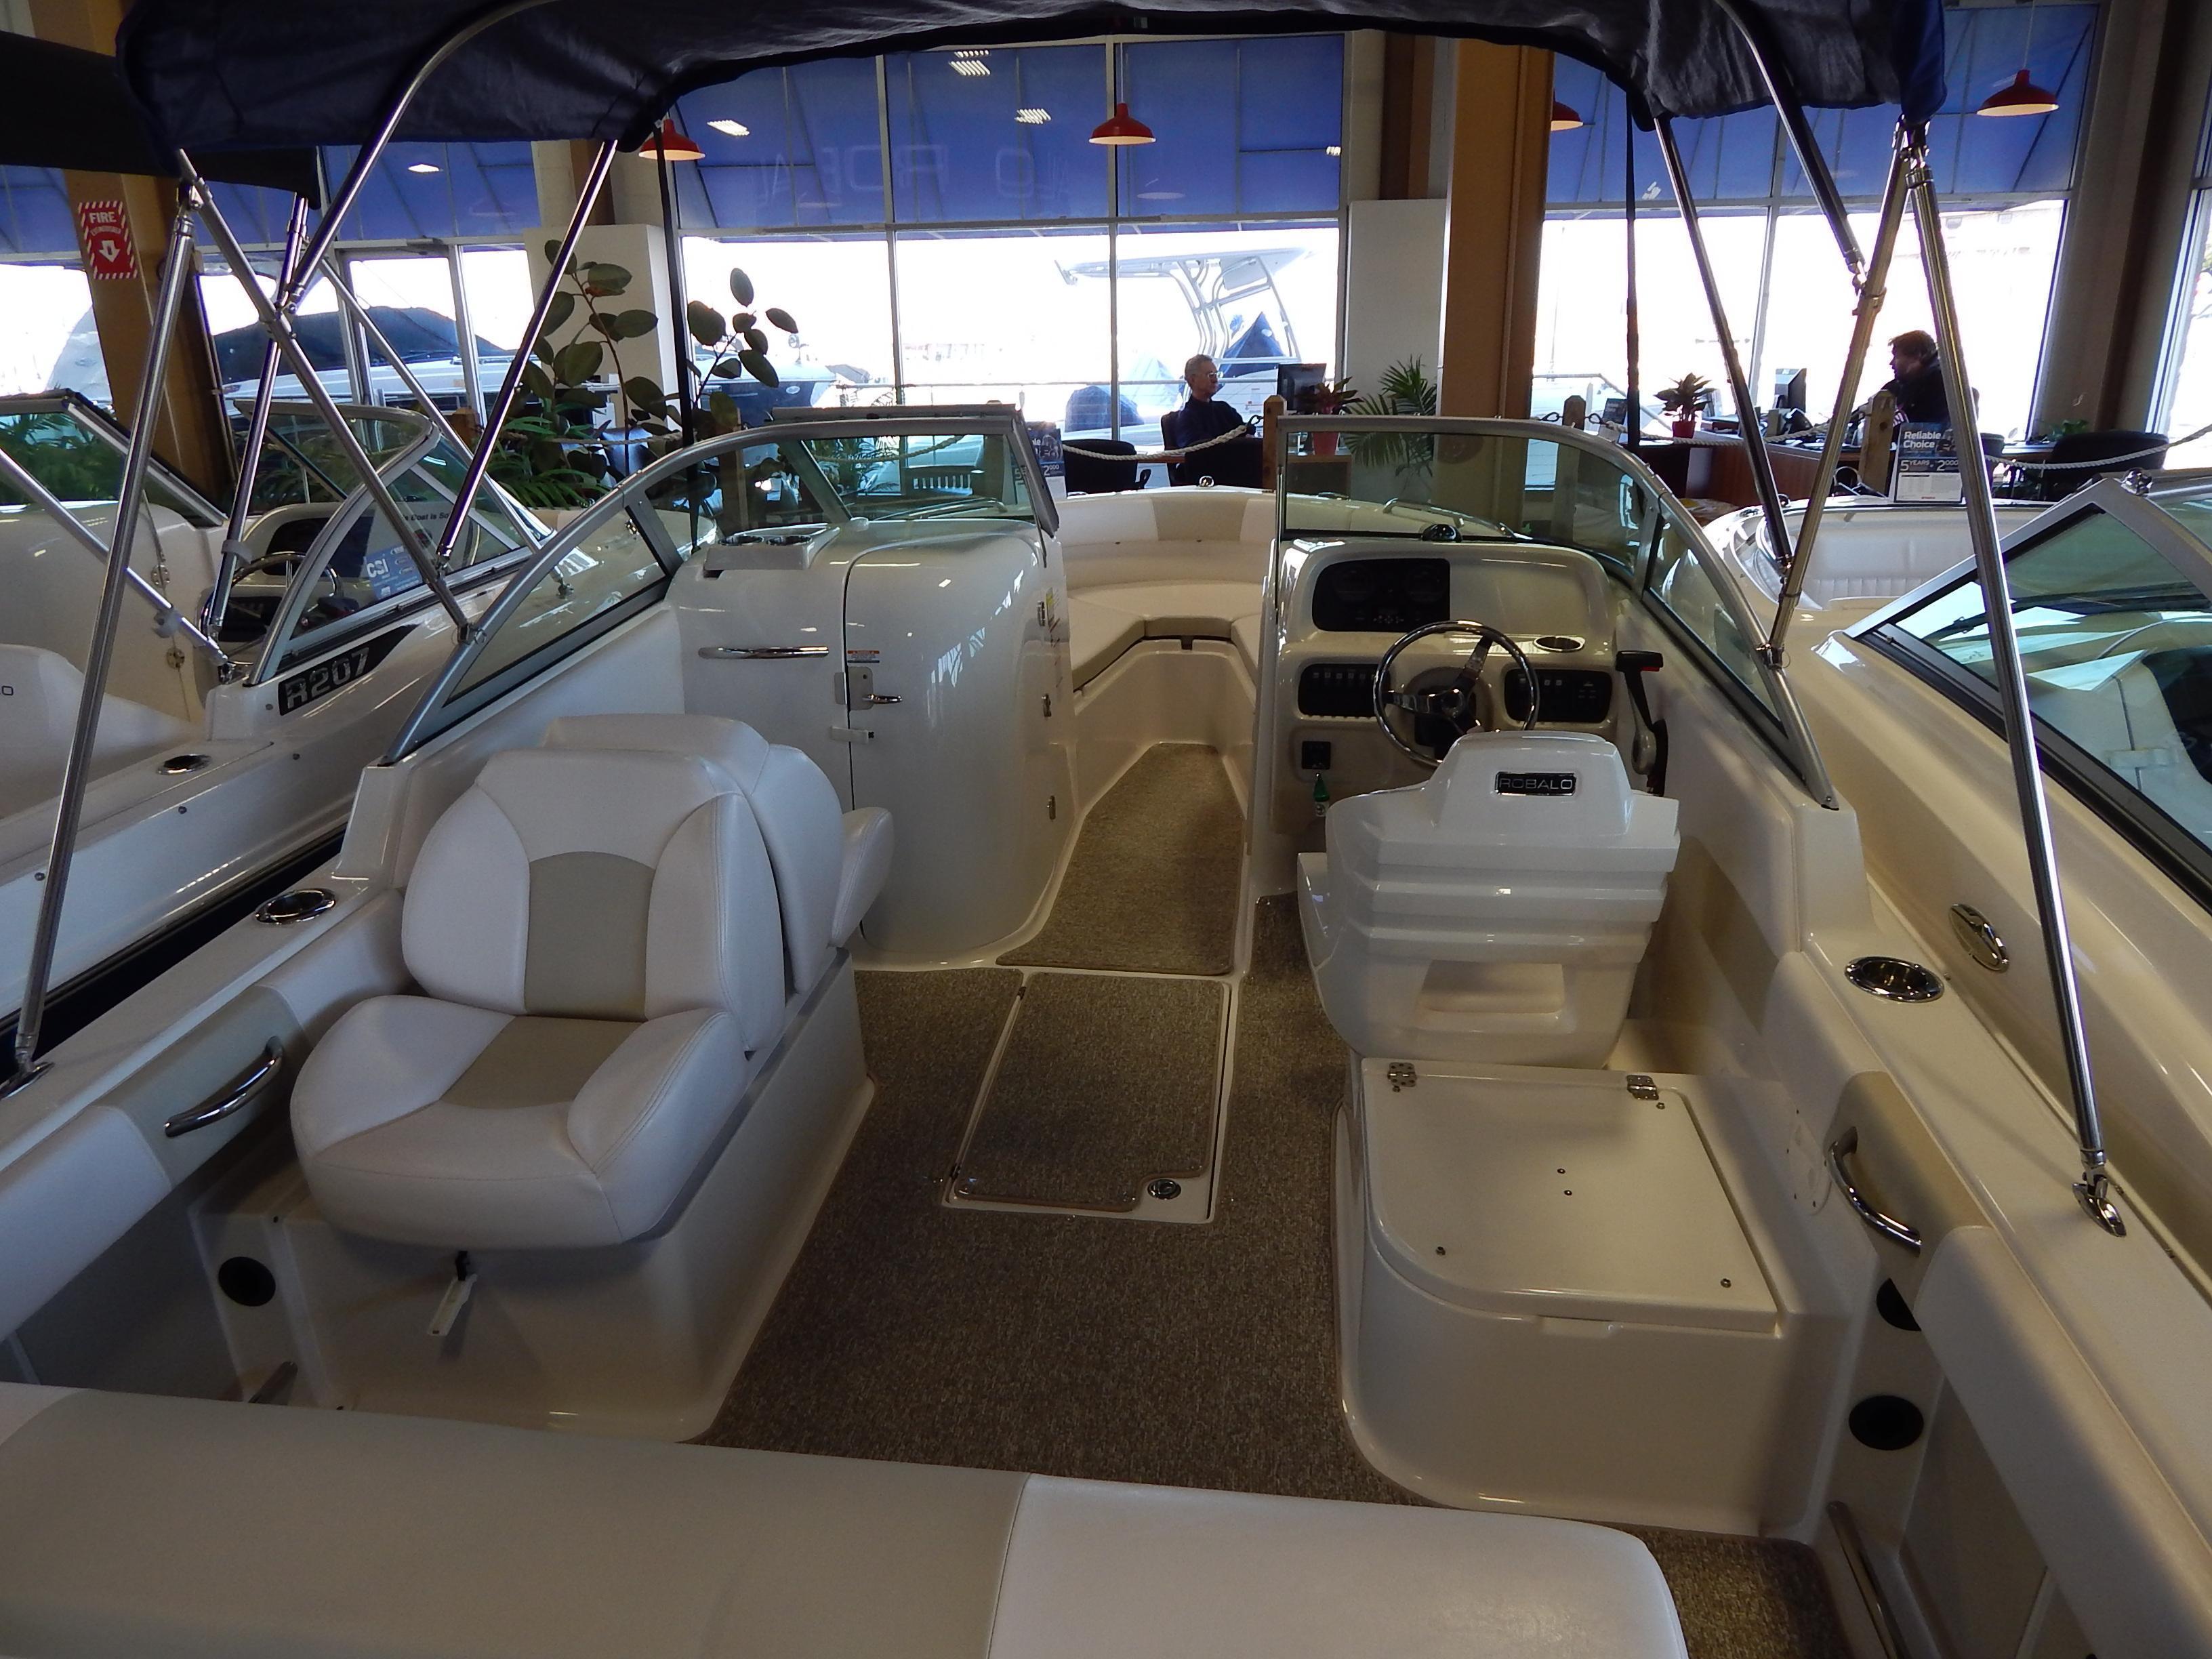 Robalo R227 Dual Console, Somers Point